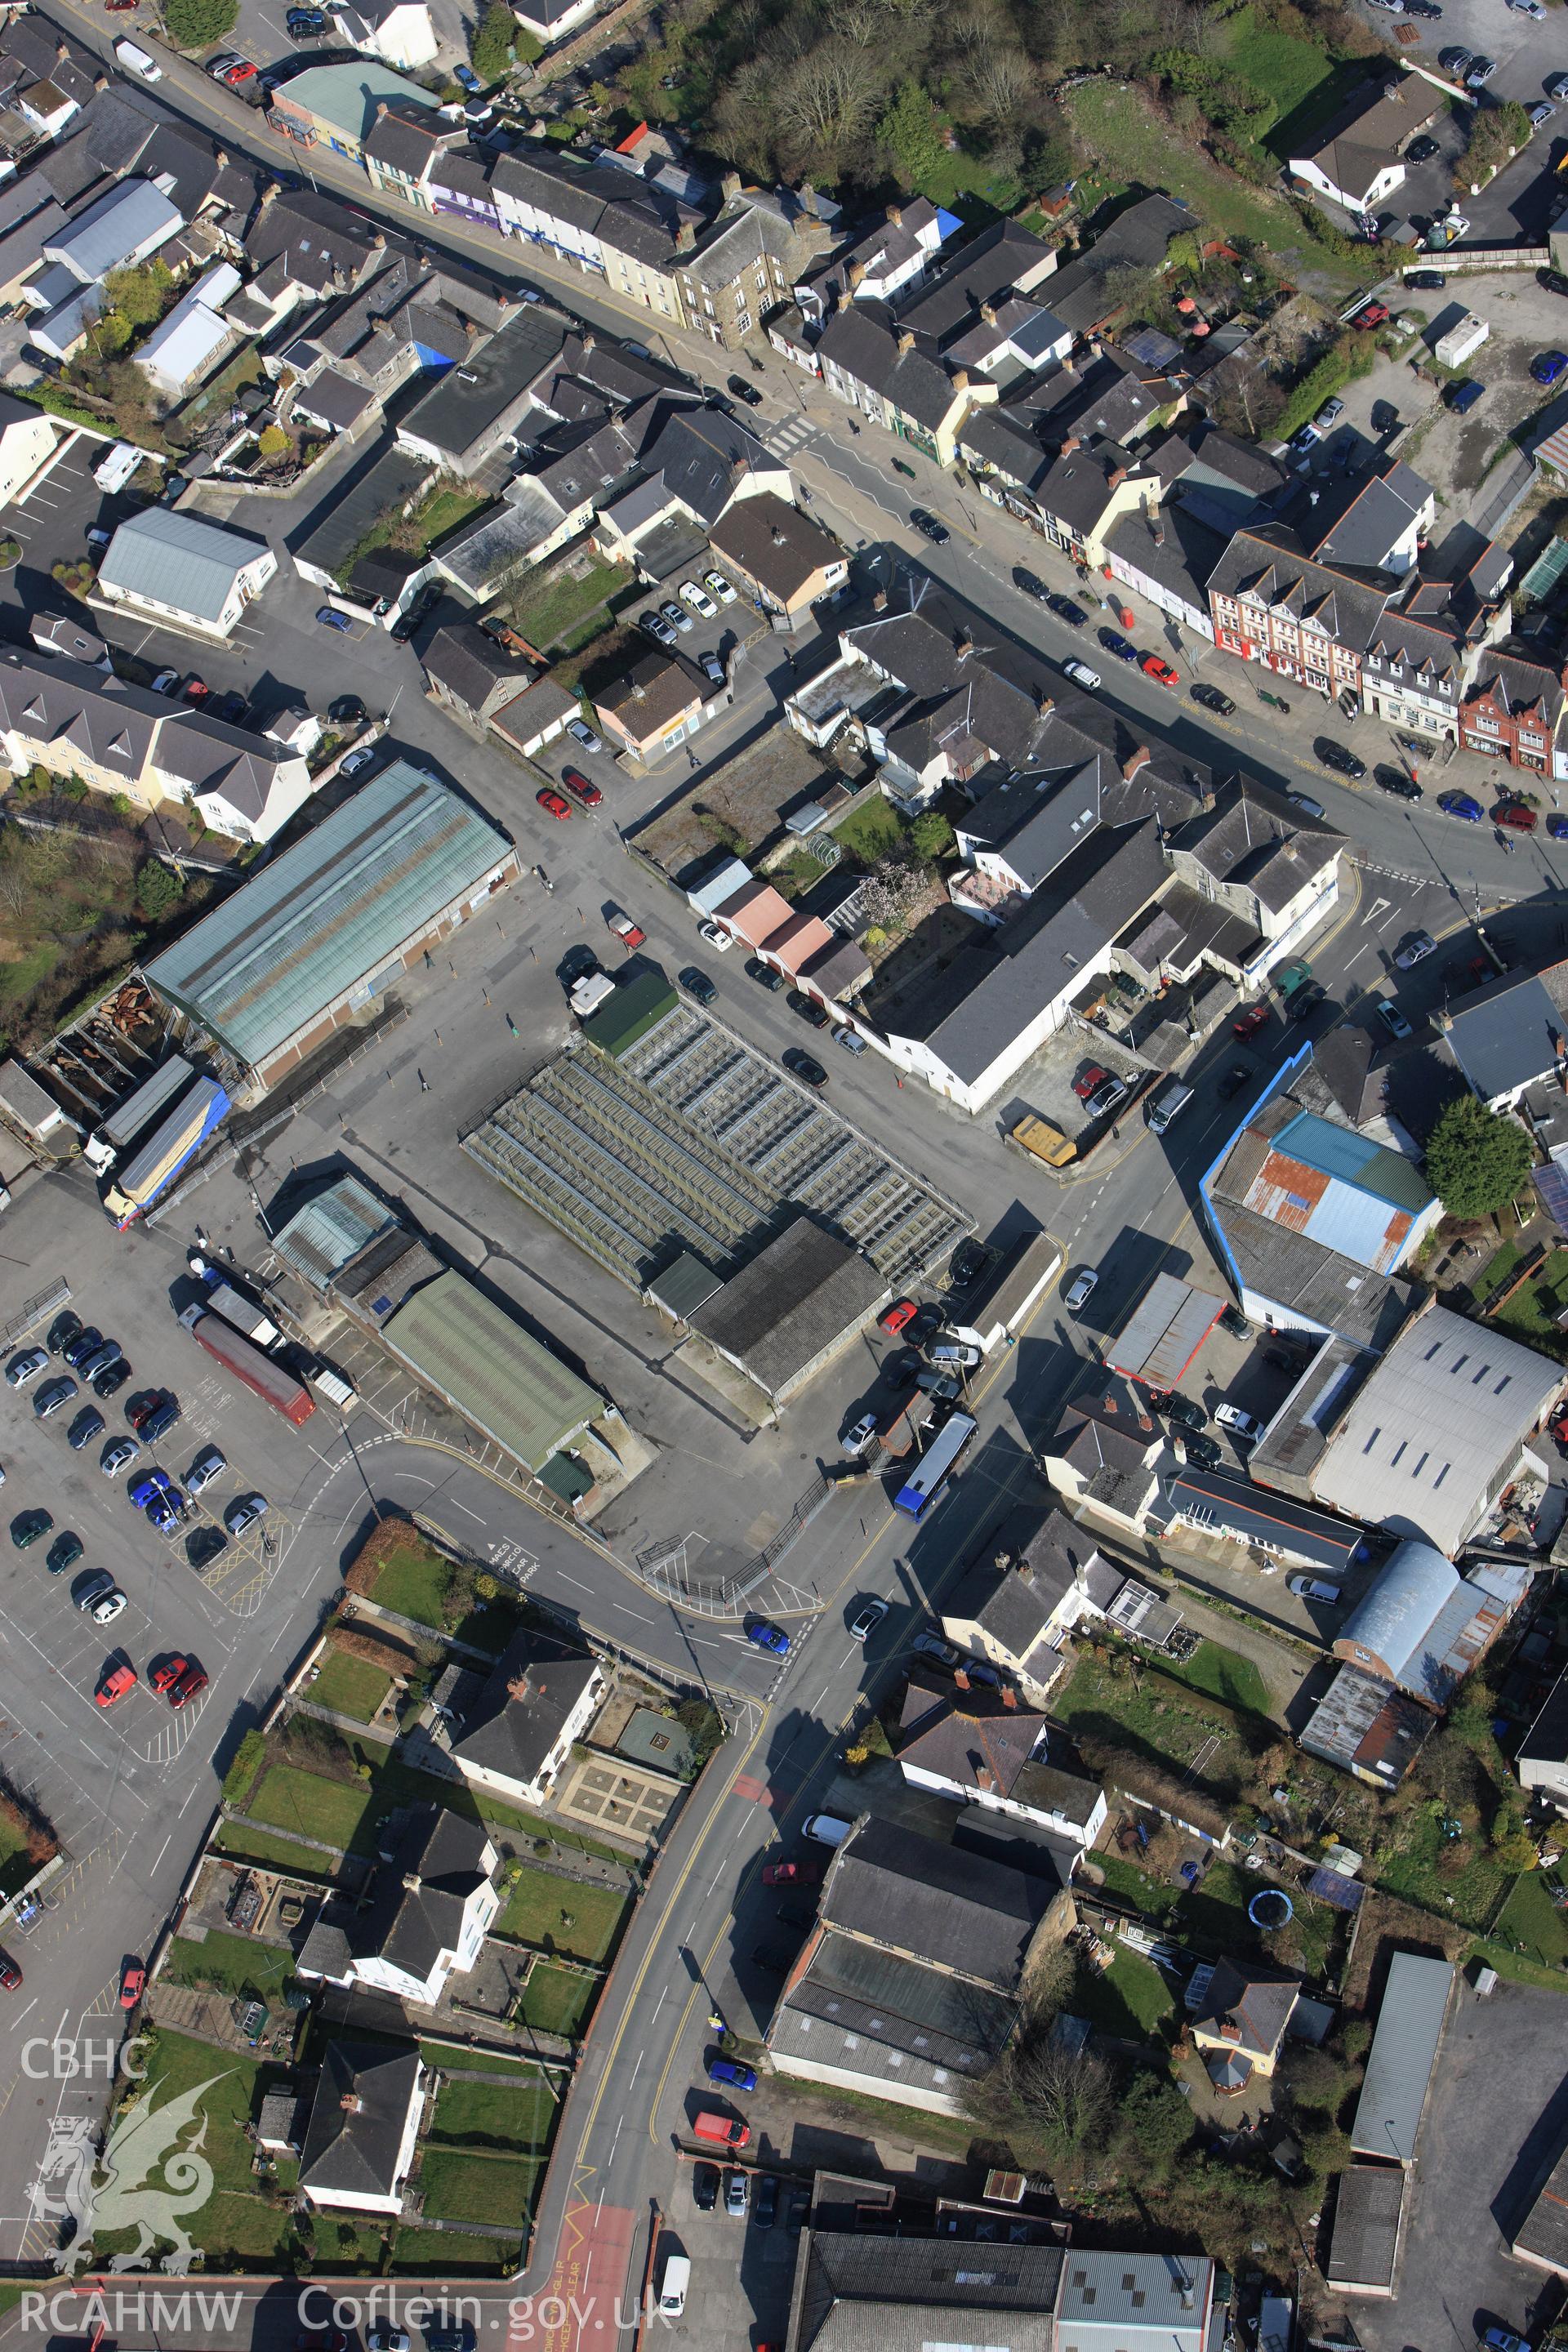 RCAHMW colour oblique aerial photograph of Newcastle Emlyn Town Taken on 13 April 2010 by Toby Driver